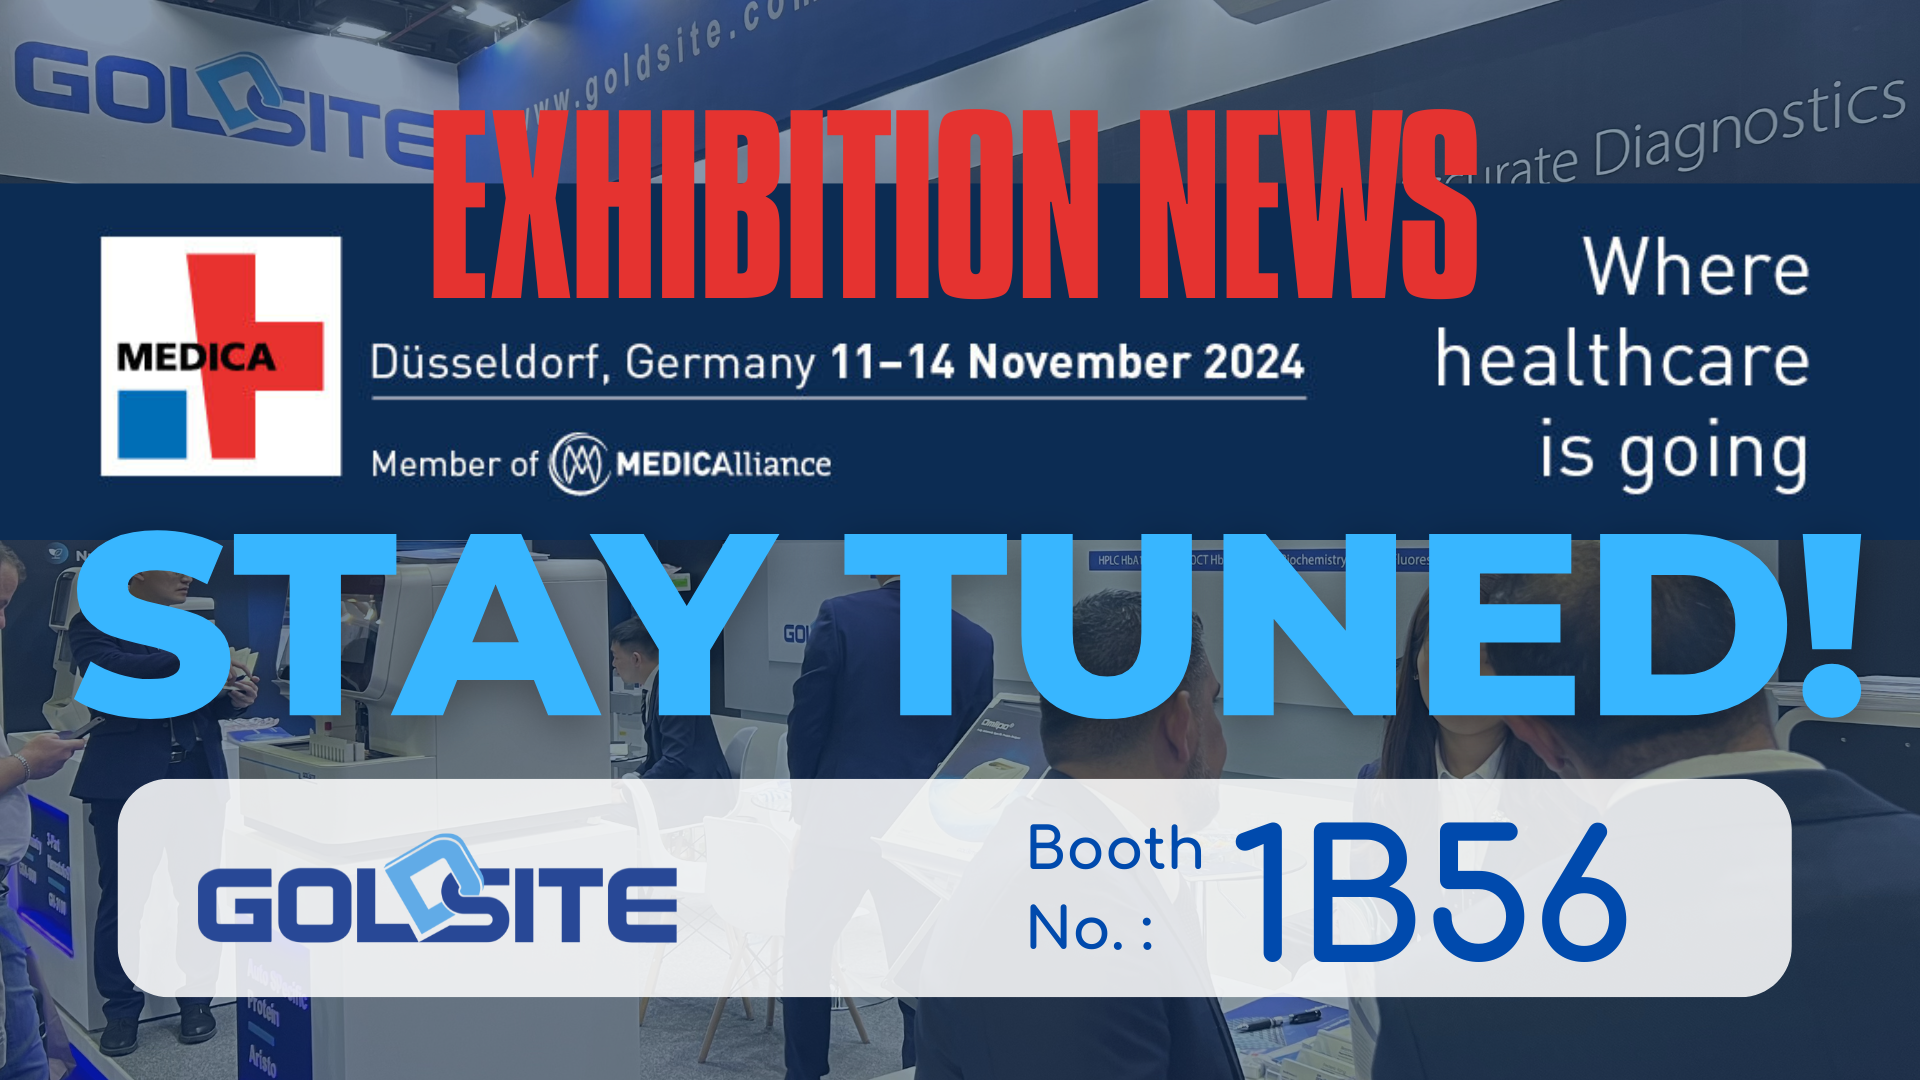 Upcoming Event: Goldsite To Exhibit at MEDICA 2024 in Germany